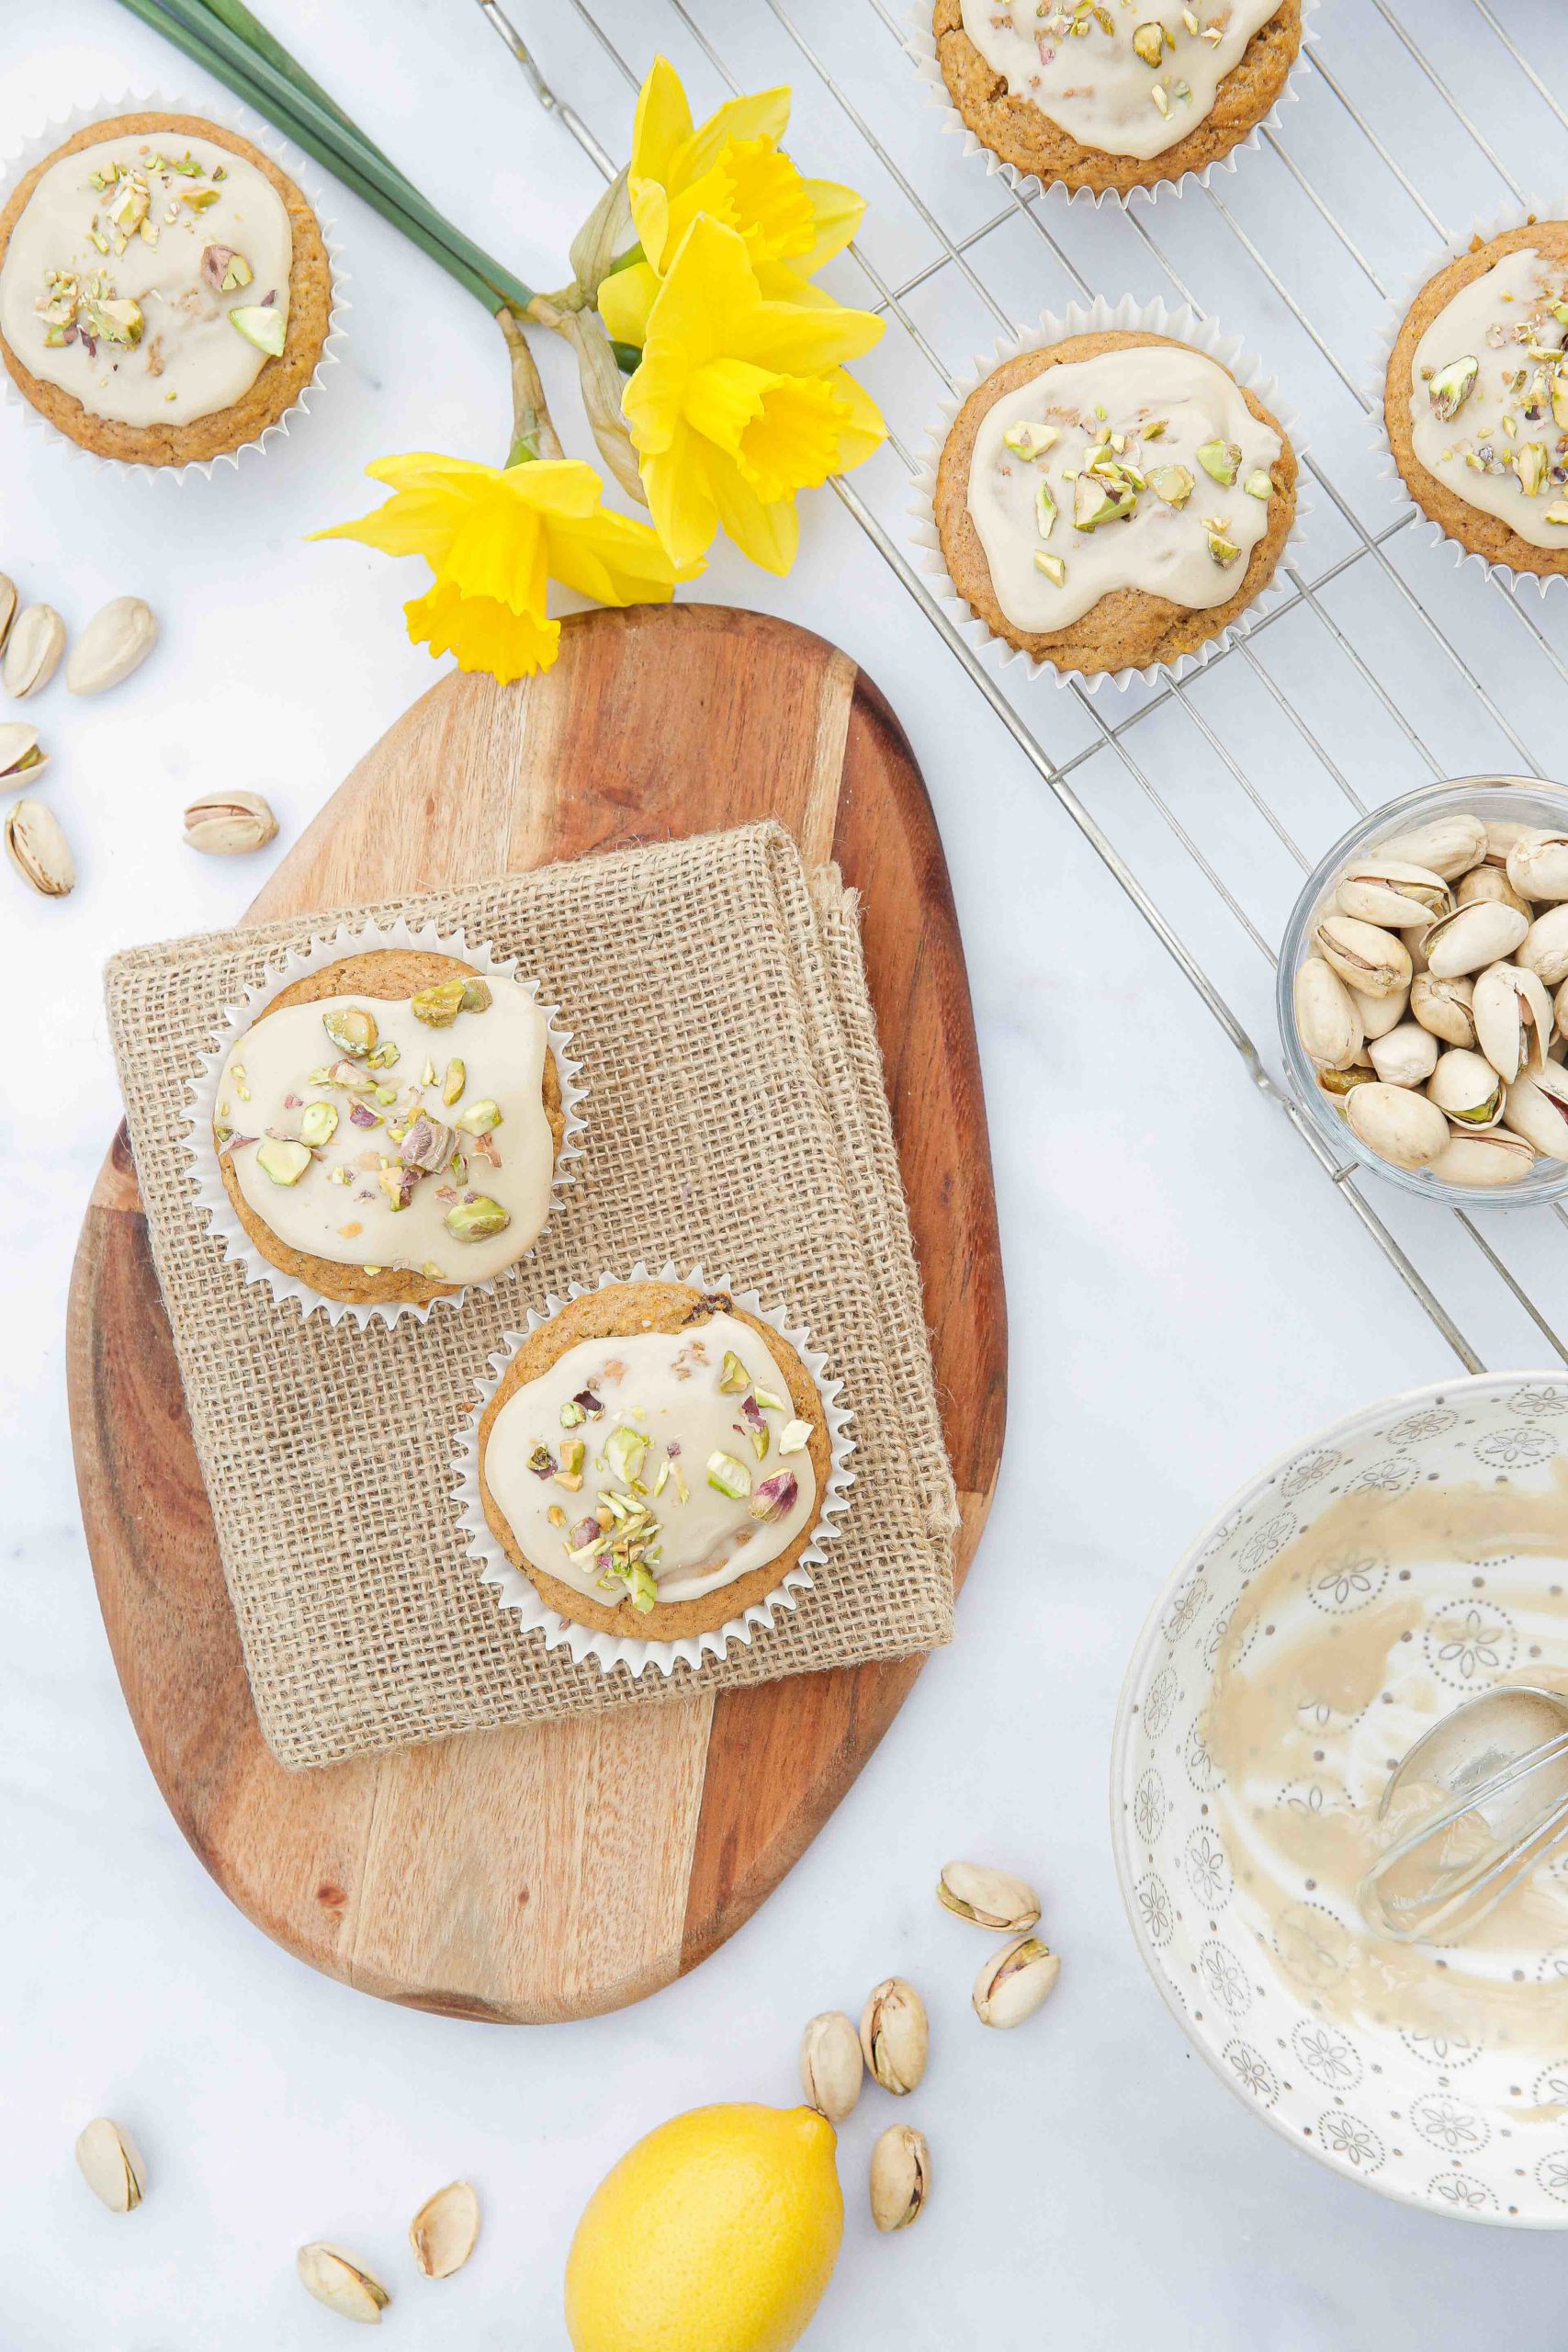 Delicious and super easy vegan carrot cake muffins with all the spice and flavour of carrot cake just in a more portable form! Topped with a lovely lemon icing and chopped pistachios. Enjoy with your morning coffee or as an afternoon treat. Recipe on thecookandhim.com | #carrotmuffins #carrotcakemuffins #muffinrecipe #veganmuffins #snack #vegansnacks